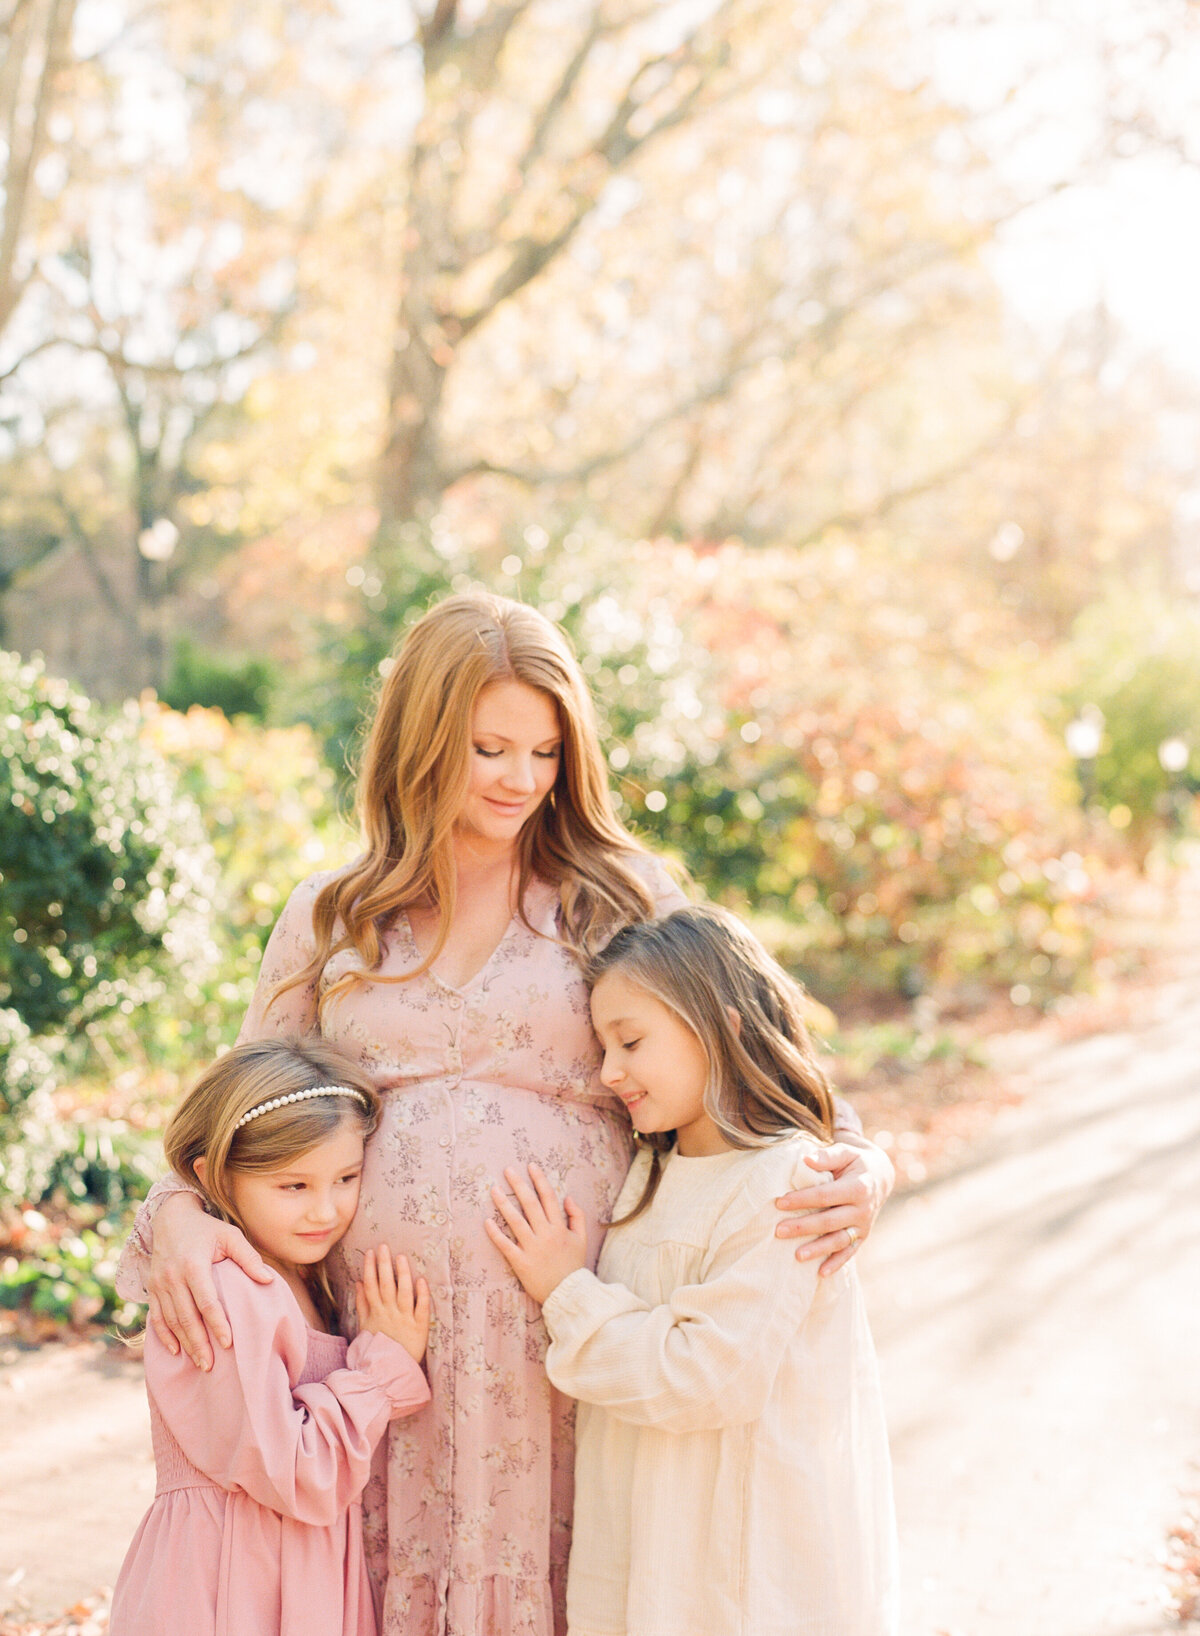 Mom snuggling daughters during a wake forest nc maternity session. Photographed by Raleigh maternity photograph A.J. Dunlap Photography.